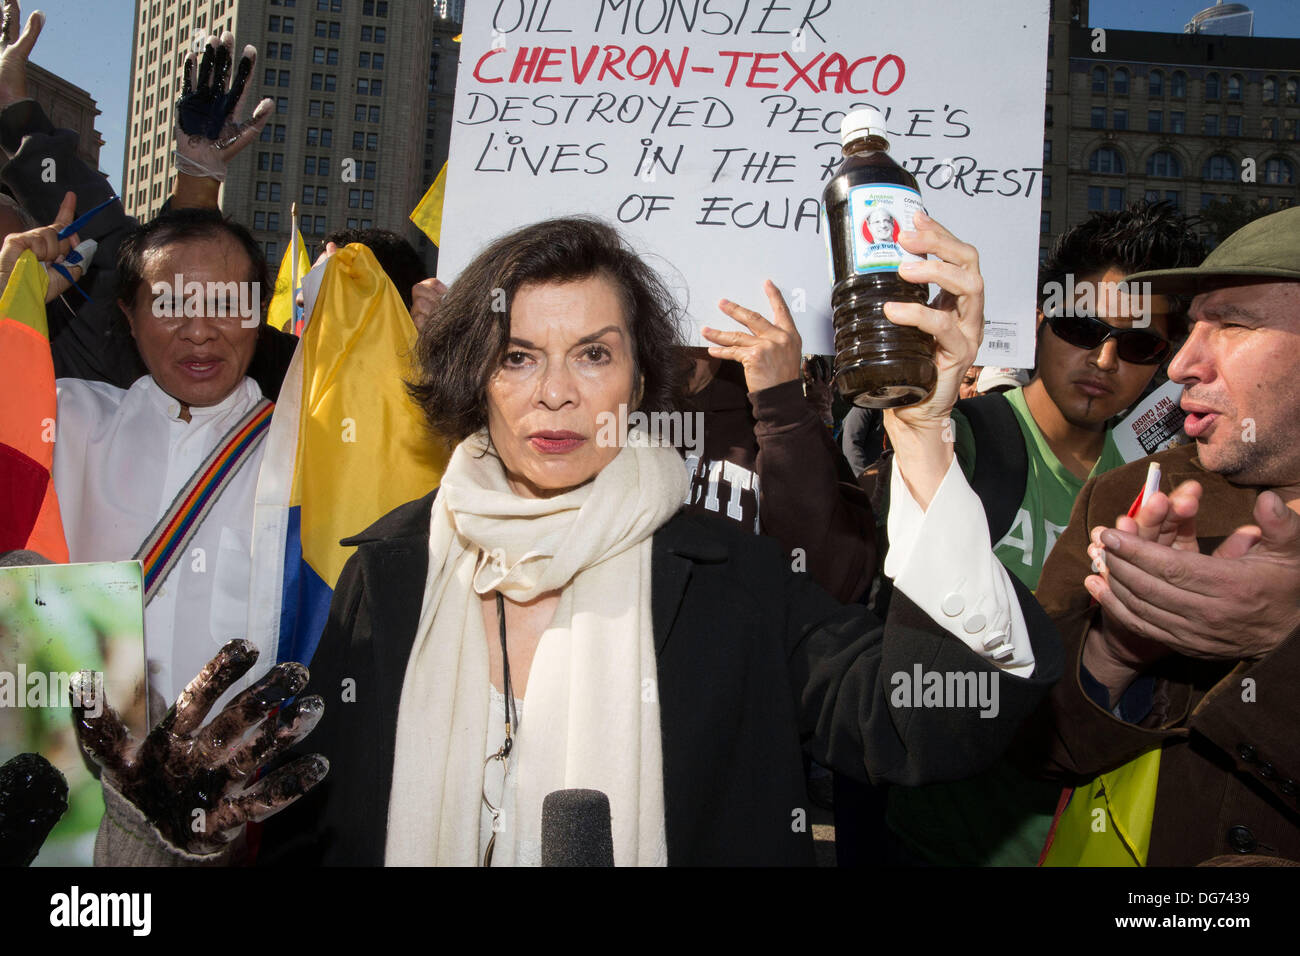 New York, USA. 15th October 2013. Bianca Jagger speaks out against Chevron.Ecuadorean protesters some wearing traditional dress demonstrated outside the United States courthouse near Foley Square in lower Manhattan. A court in Ecuador has made a judgment against Chevron for $18 billion. Chevron lawyers today in this courthouse are trying to  persuade a judge that Ecuadorean's have used bribery to win the settlement. Credit:  Scott Houston/Alamy Live News Stock Photo